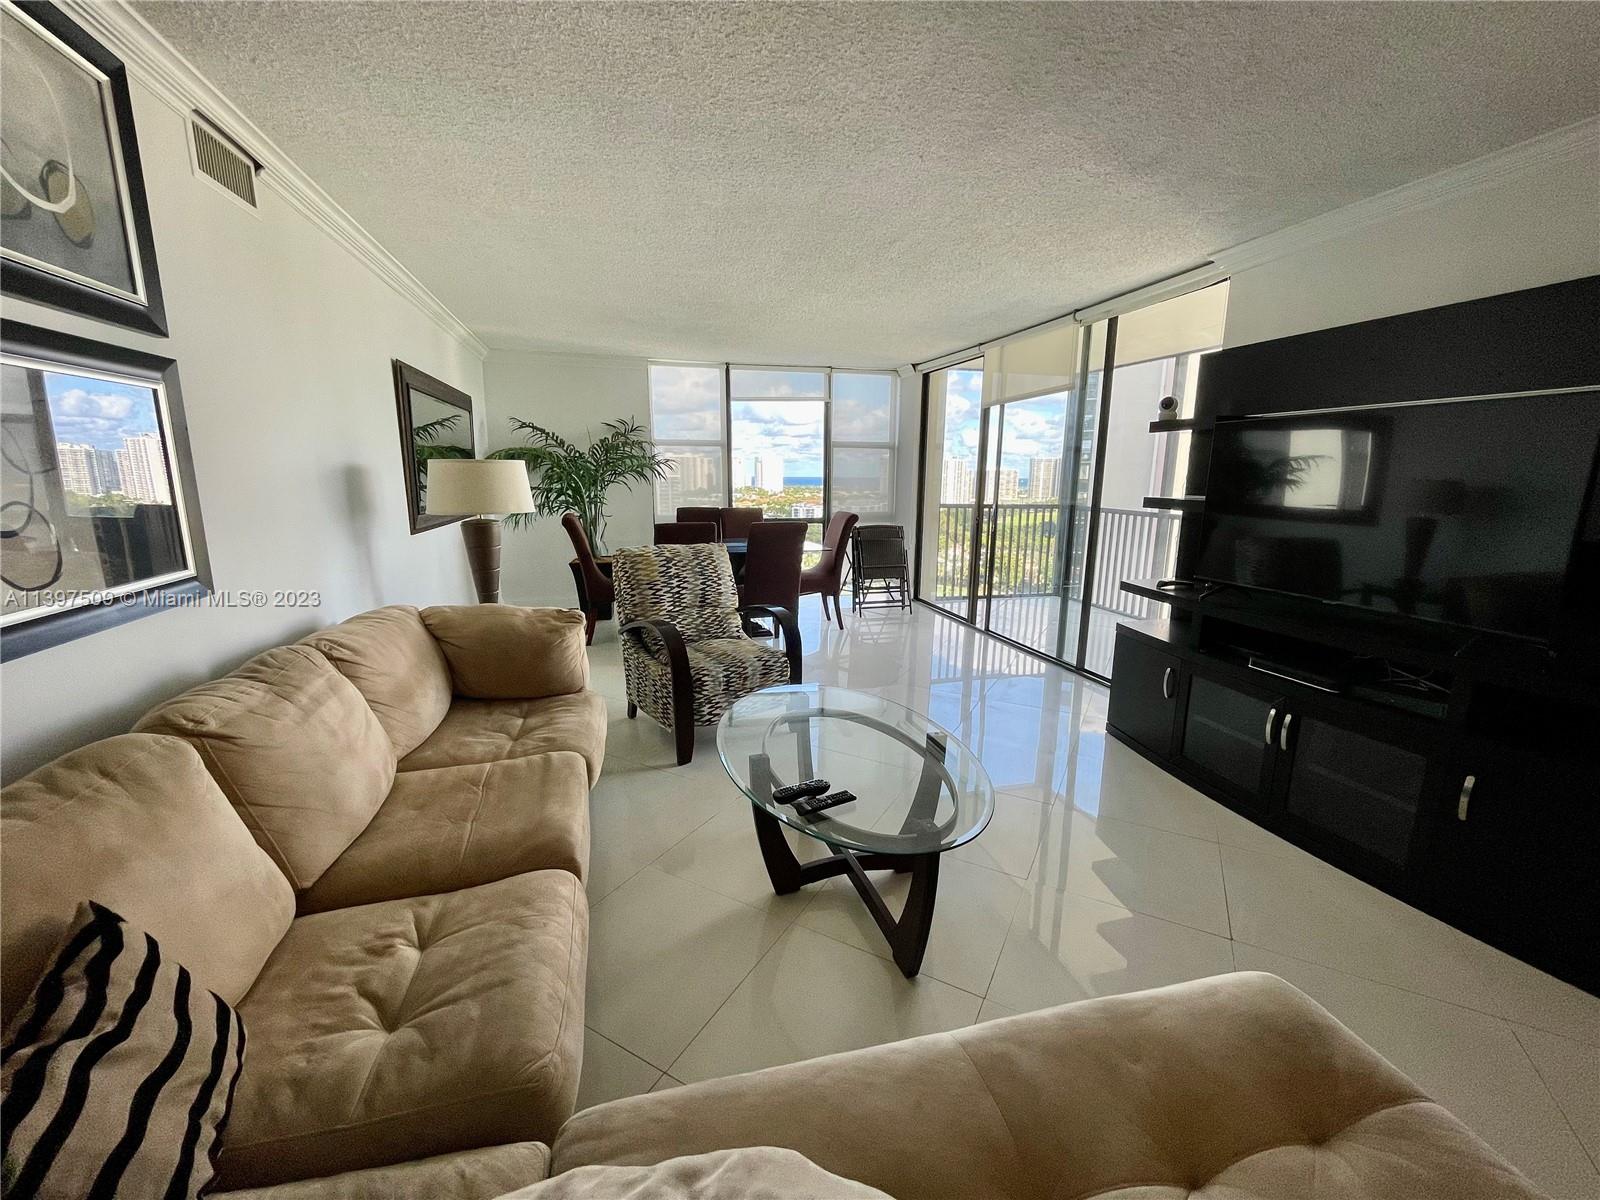 2/2 renovated and fully furnished corner condo with panoramic views of the Turnberry Golf Course and ocean views from the 20th Floor. Spacious unit with over 1300 sq ft with plenty of natural light natural light.  One covered assigned parking, cable TV & internet included by HOA, pool, spa, jacuzzi, gated community, excellent school district, walking distance to Aventura Mall and 5 minute drive to the beach.  There is also a Free Aventura shuttle available. 2 YEARS LEASE REQUIRED BY THE ASSOCIATION.